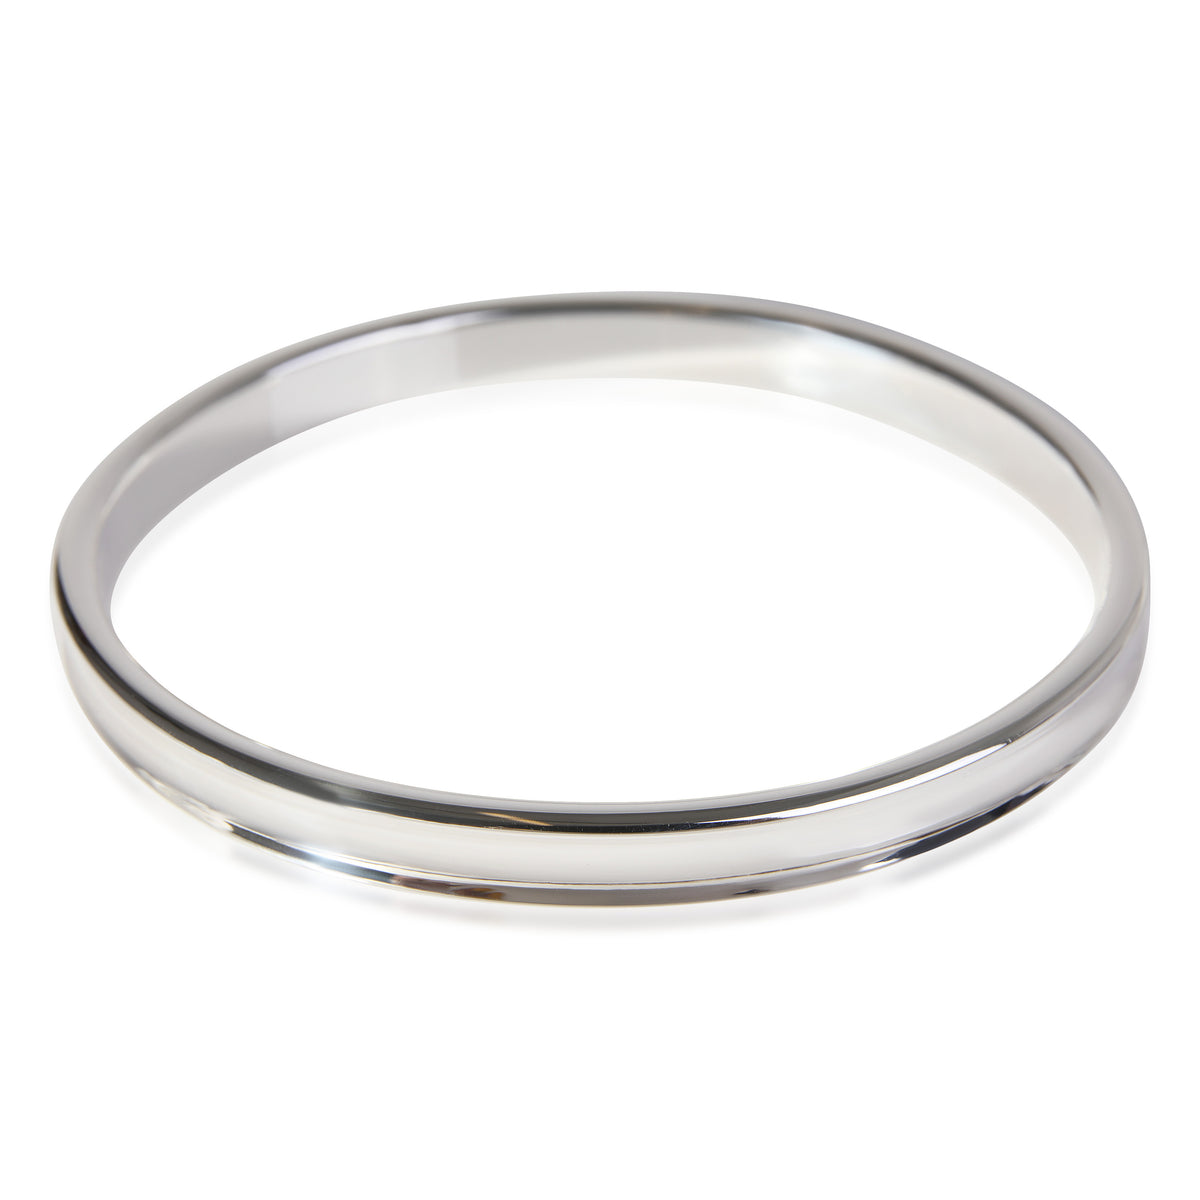 Tiffany & Co. 1837 Narrow Bangle in Sterling Silver